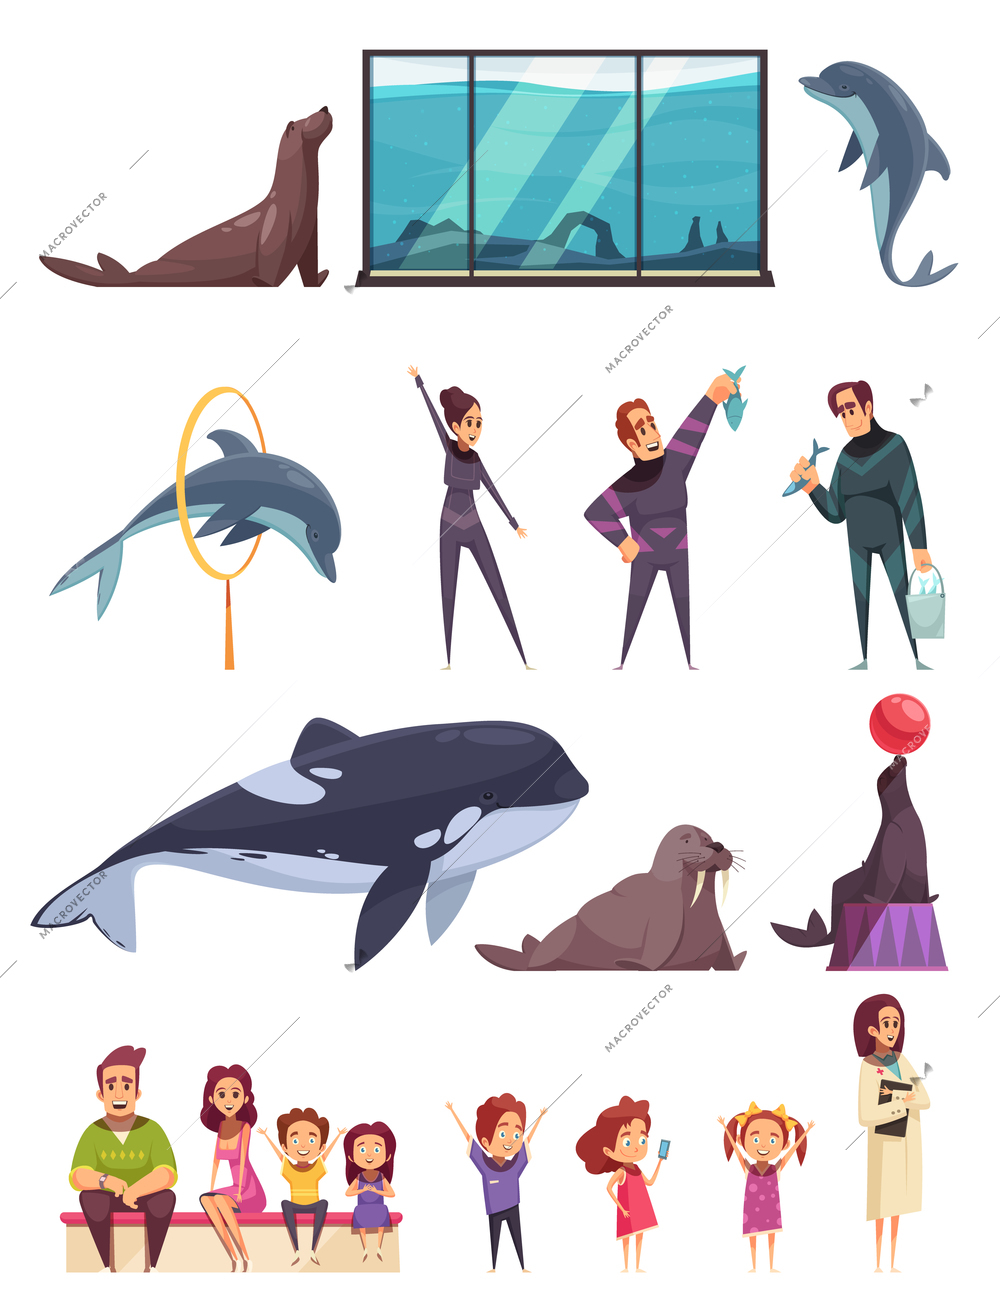 Dolphinarium set with isolated compositions of flat animal images and human characters with kids and adults vector illustration